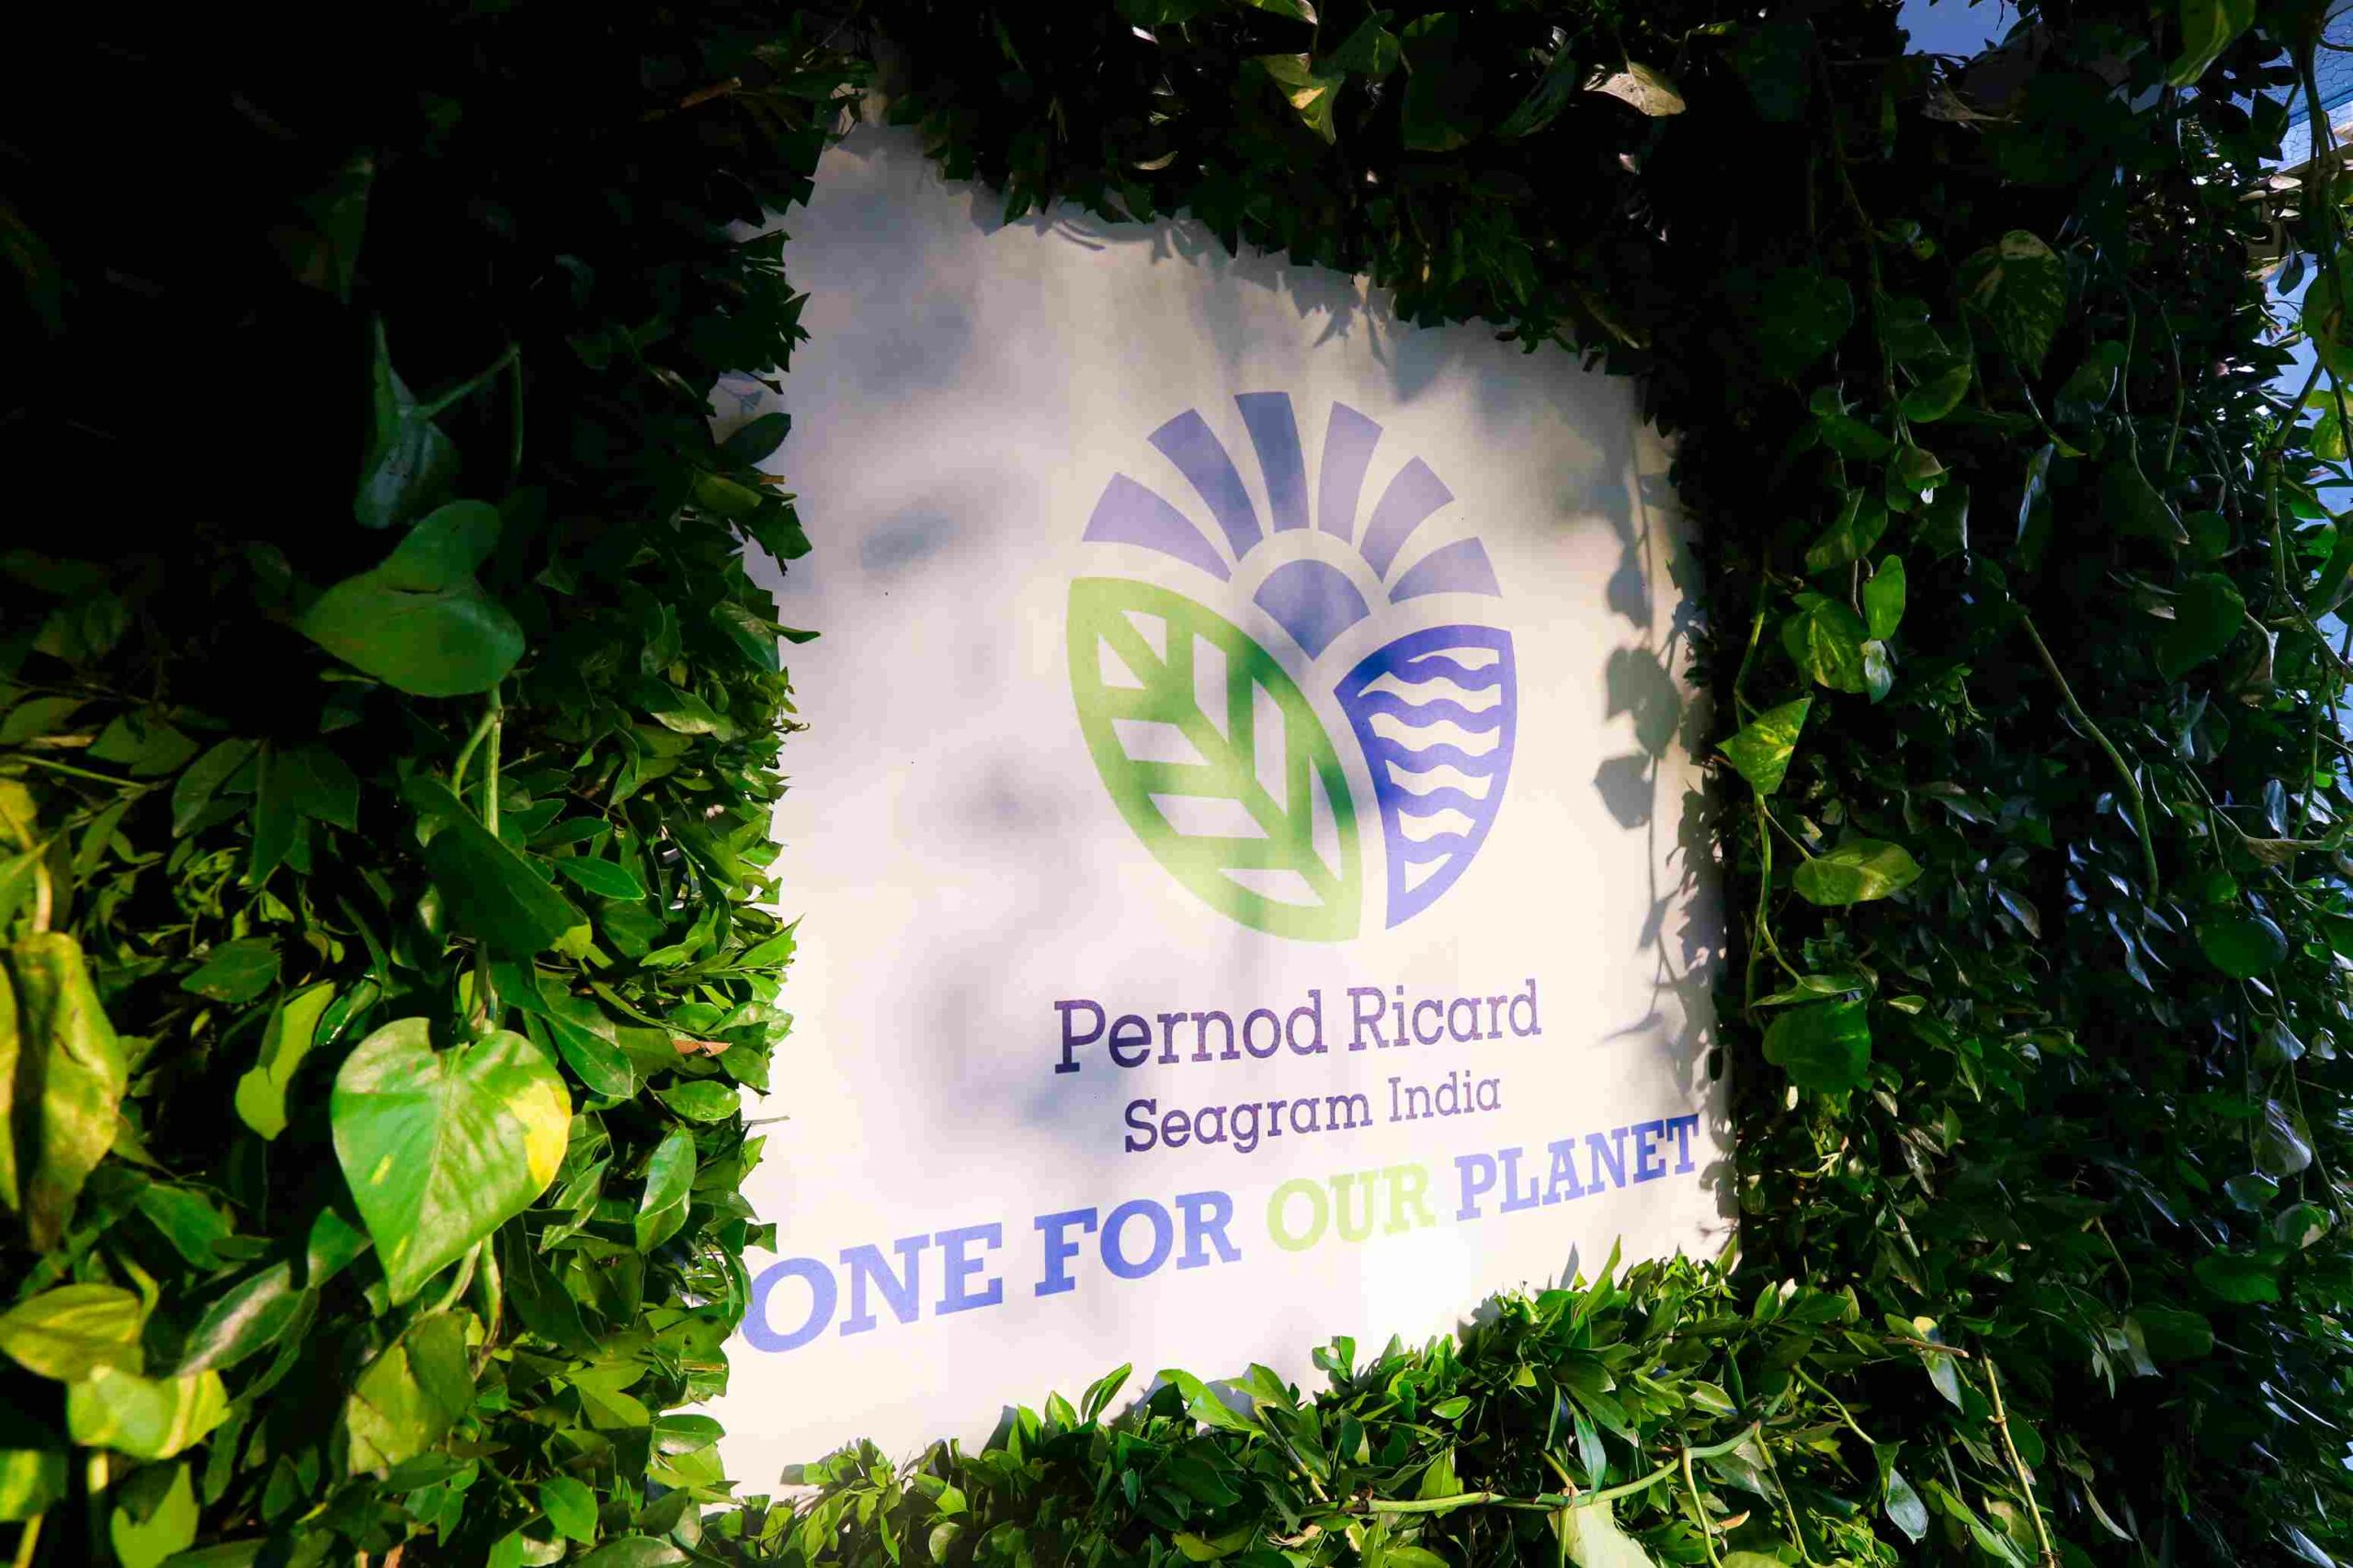 The forest-themed decor with its succulent plants was the highlight of the event, Picture credits: Pernod Ricard India